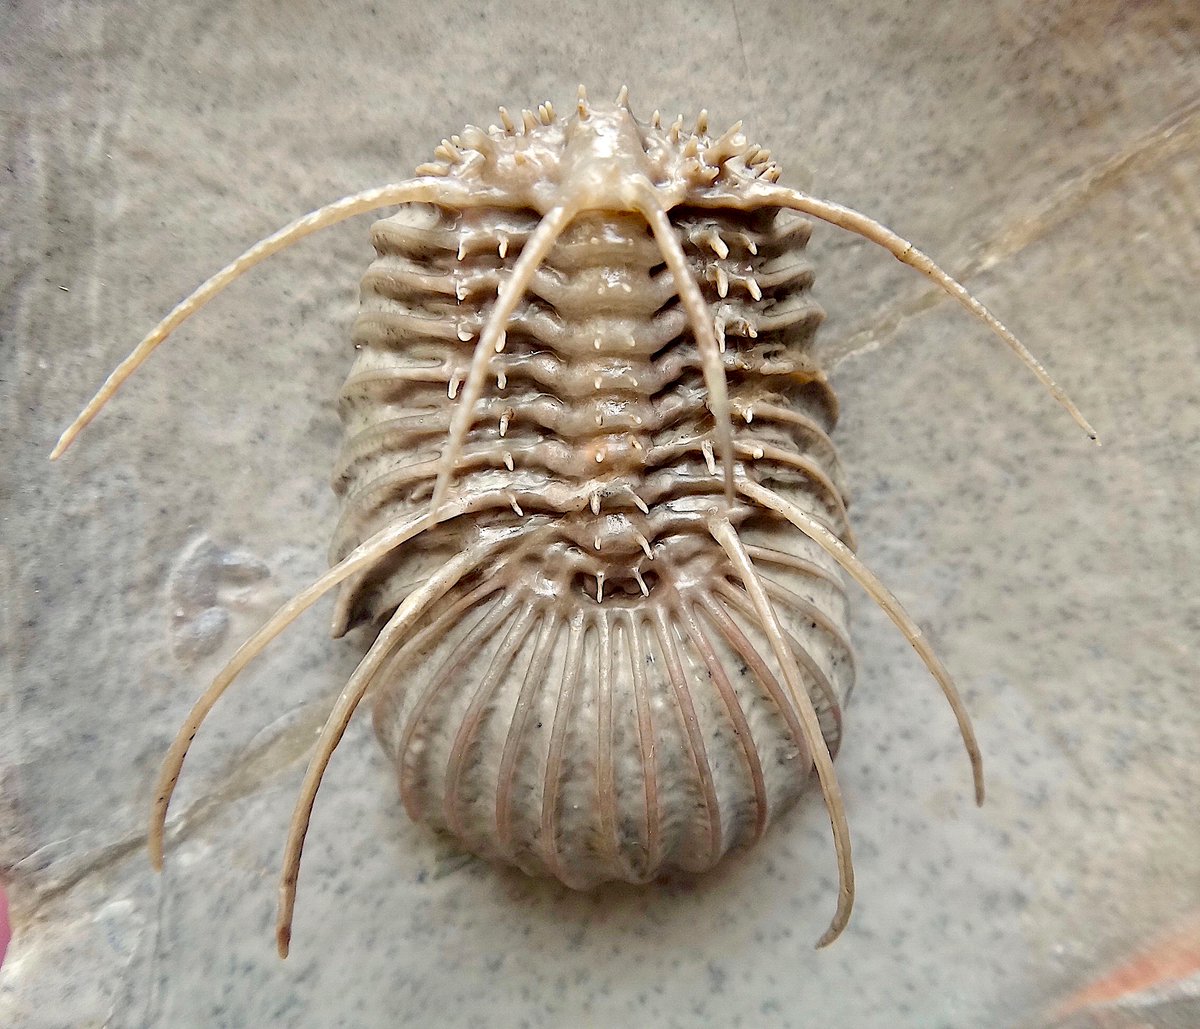 It’s #TrilobiteTuesday! Pictured is a rare, complete example of a trilobite of the genus Radiaspis. This 2-in- (5.1-cm-) long specimen was found in the Jorf Devonian outcrops of eastern Morocco. It took 30+ hours to free this spinose critter from the surrounding limestone matrix.